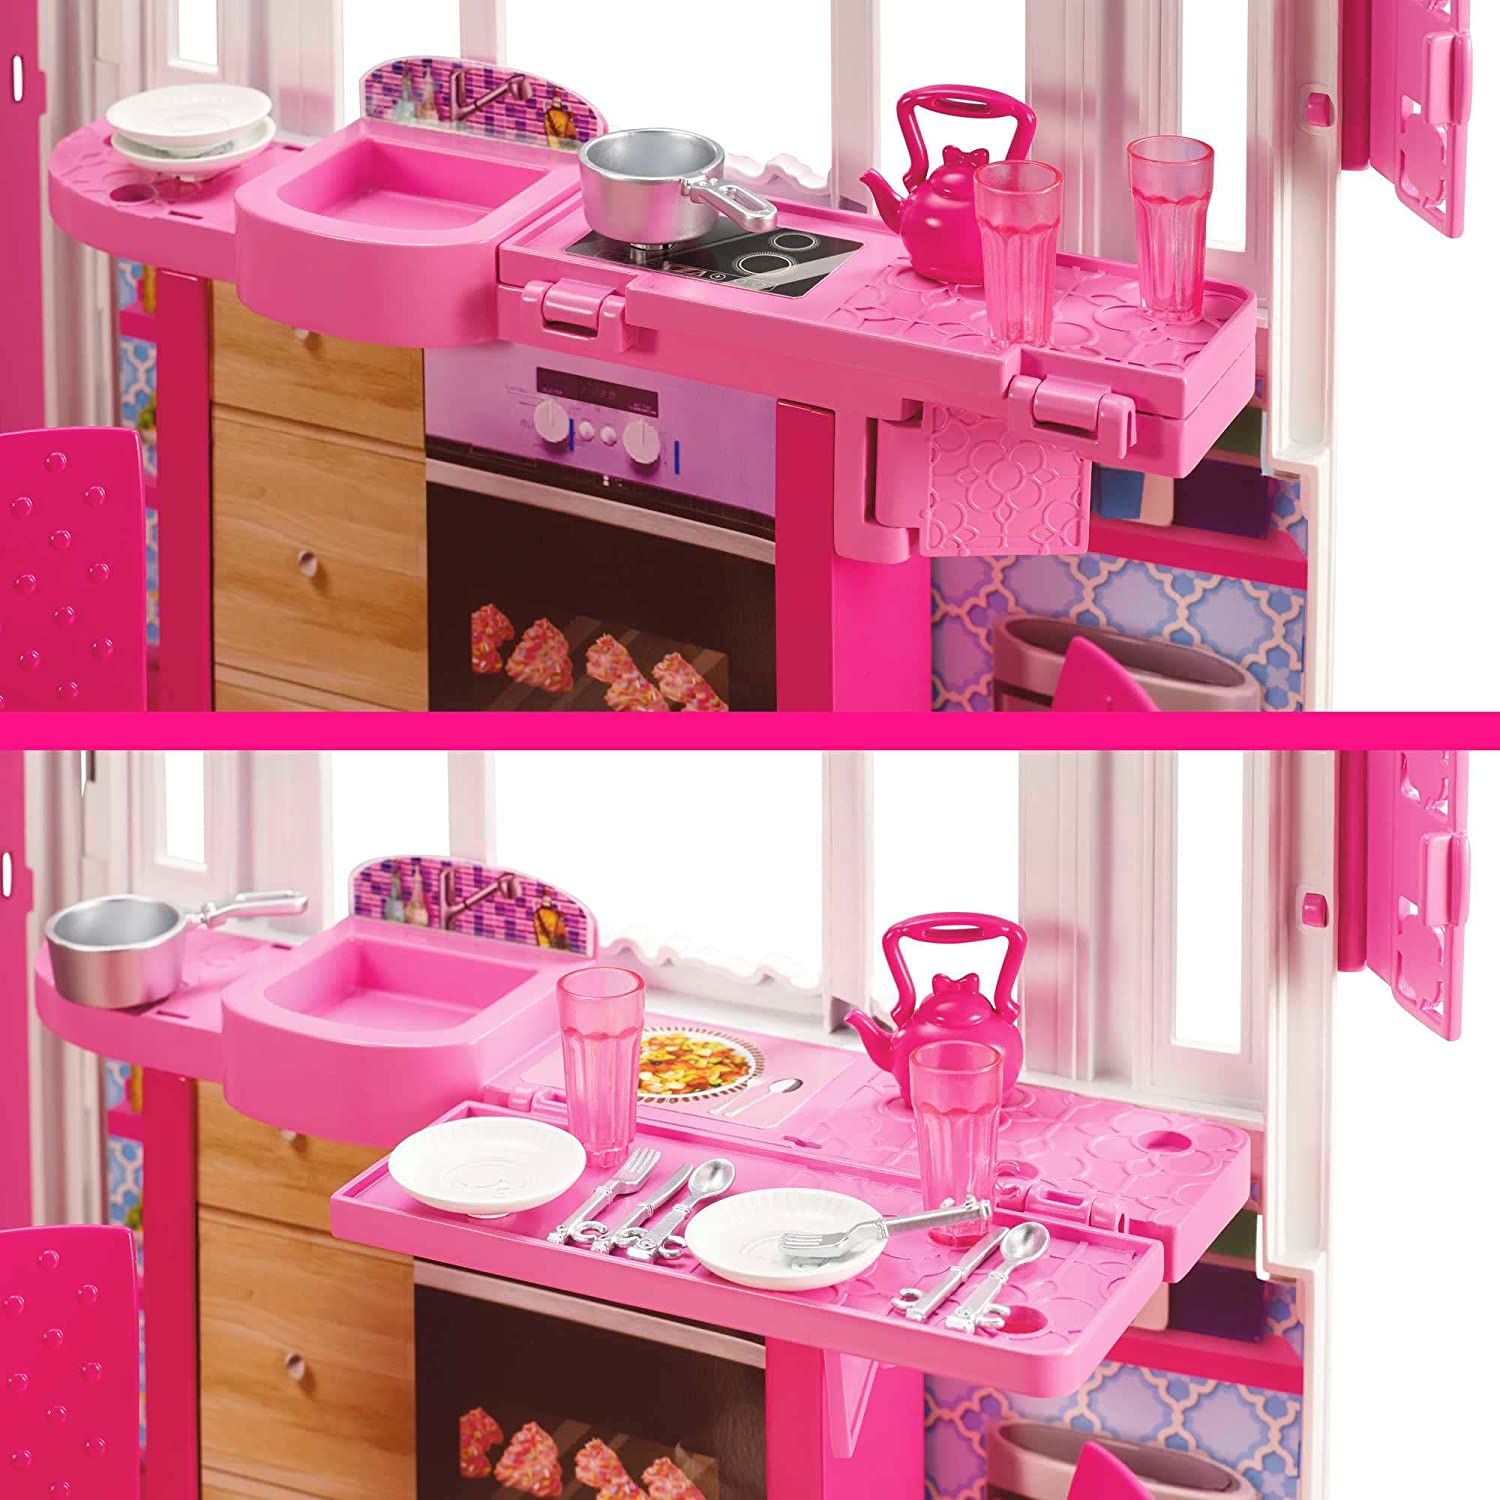 Barbie Glam Getaway Portable Dollhouse, 1 Story with Furniture, Accessories  and Carrying Handle, for 3 to 7 Year Olds